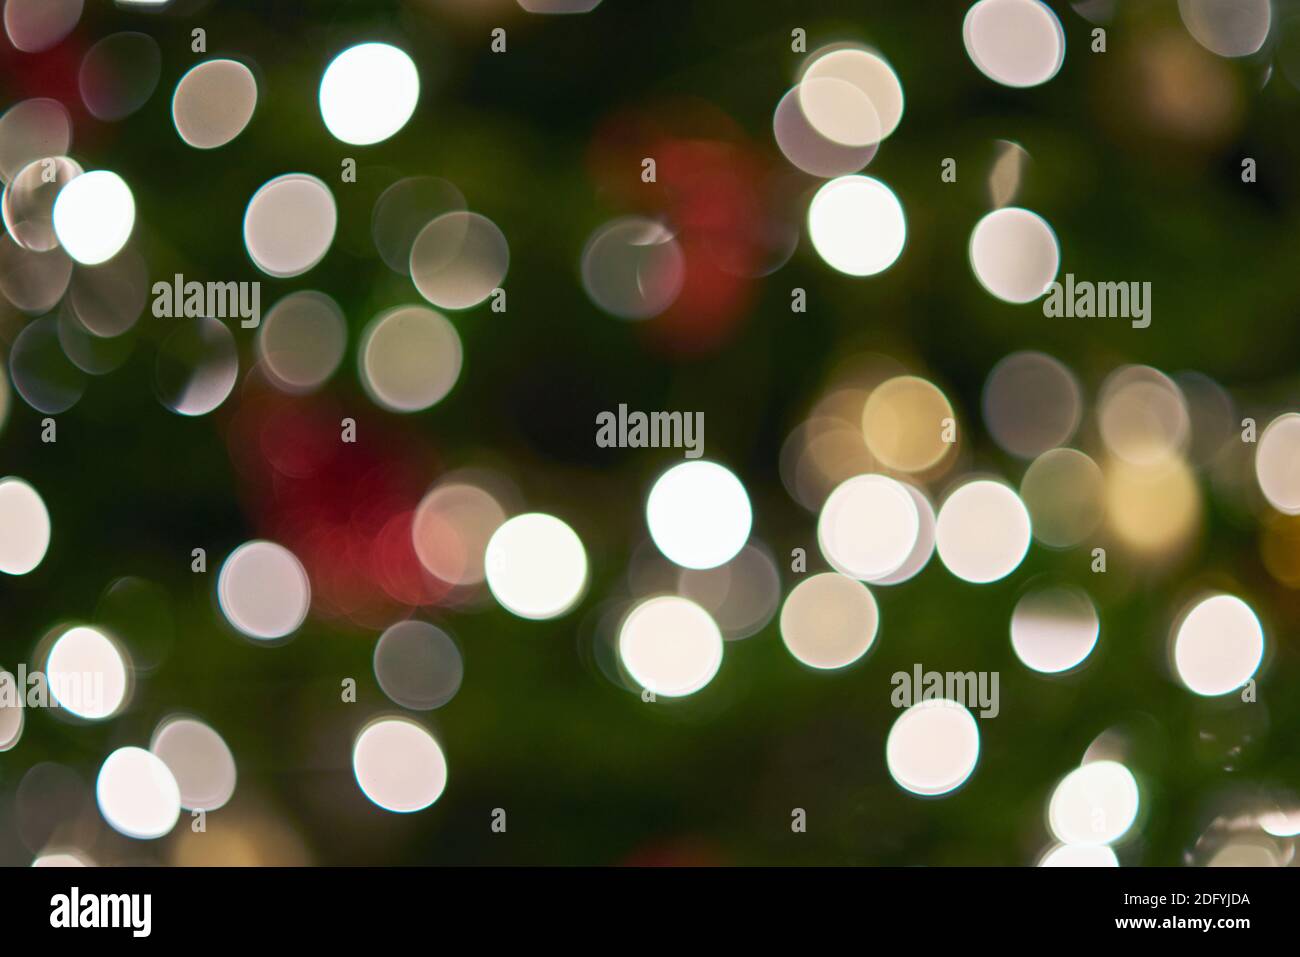 Defocused points of light from Christmas tree lights in the evening Stock Photo